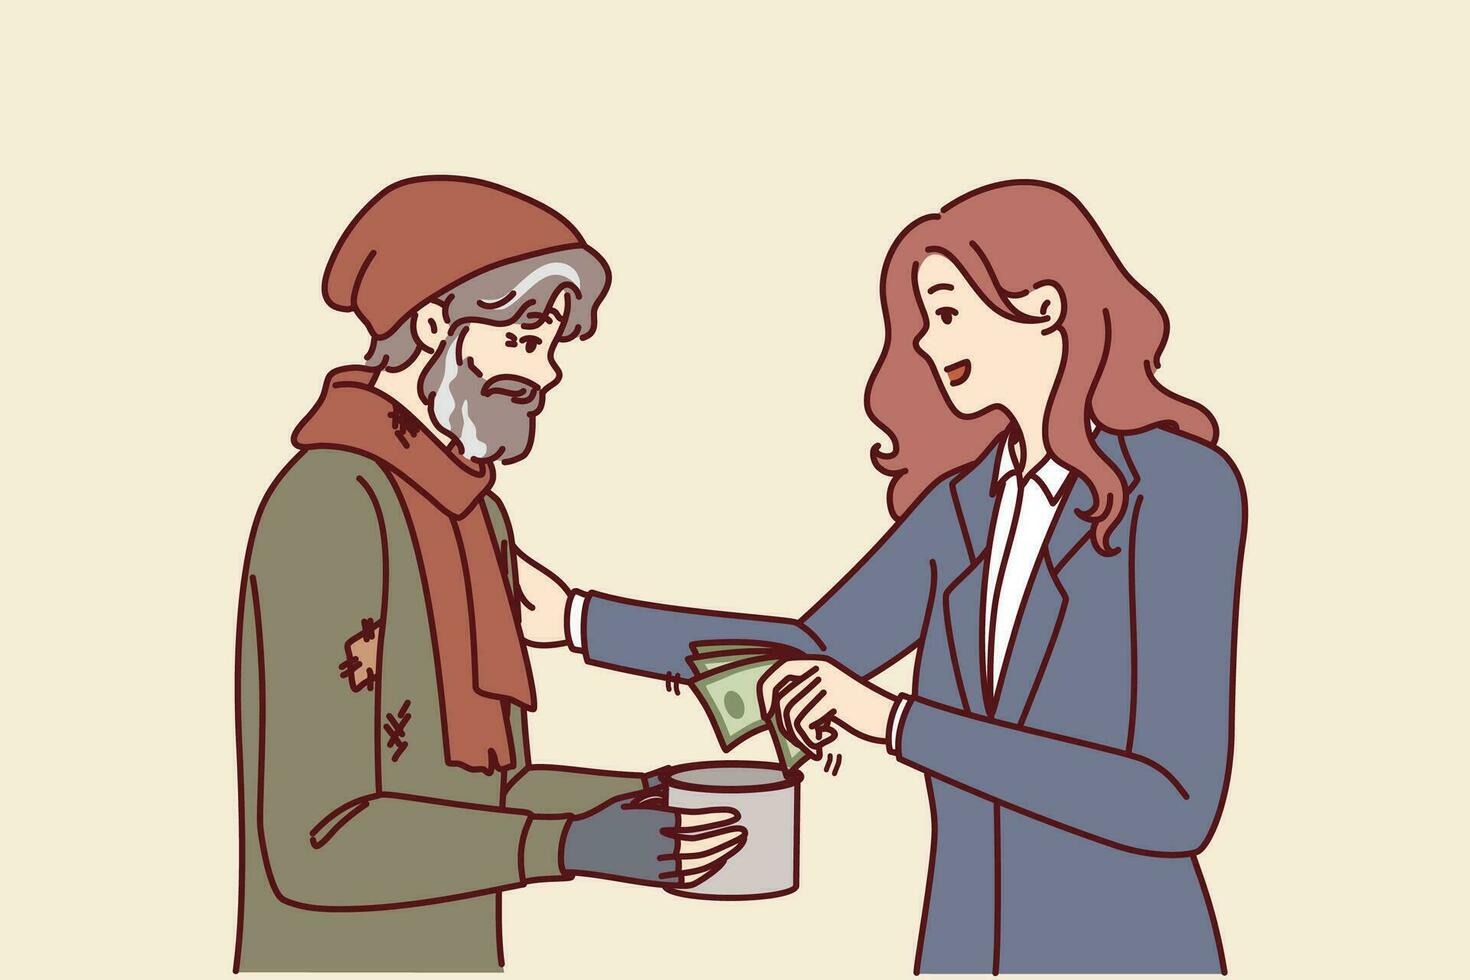 Successful woman helps beggar by giving money for food and lodging to save person has fallen into difficult situation. Merciful businesswoman in formal wear generously helps beggar for charity concept vector